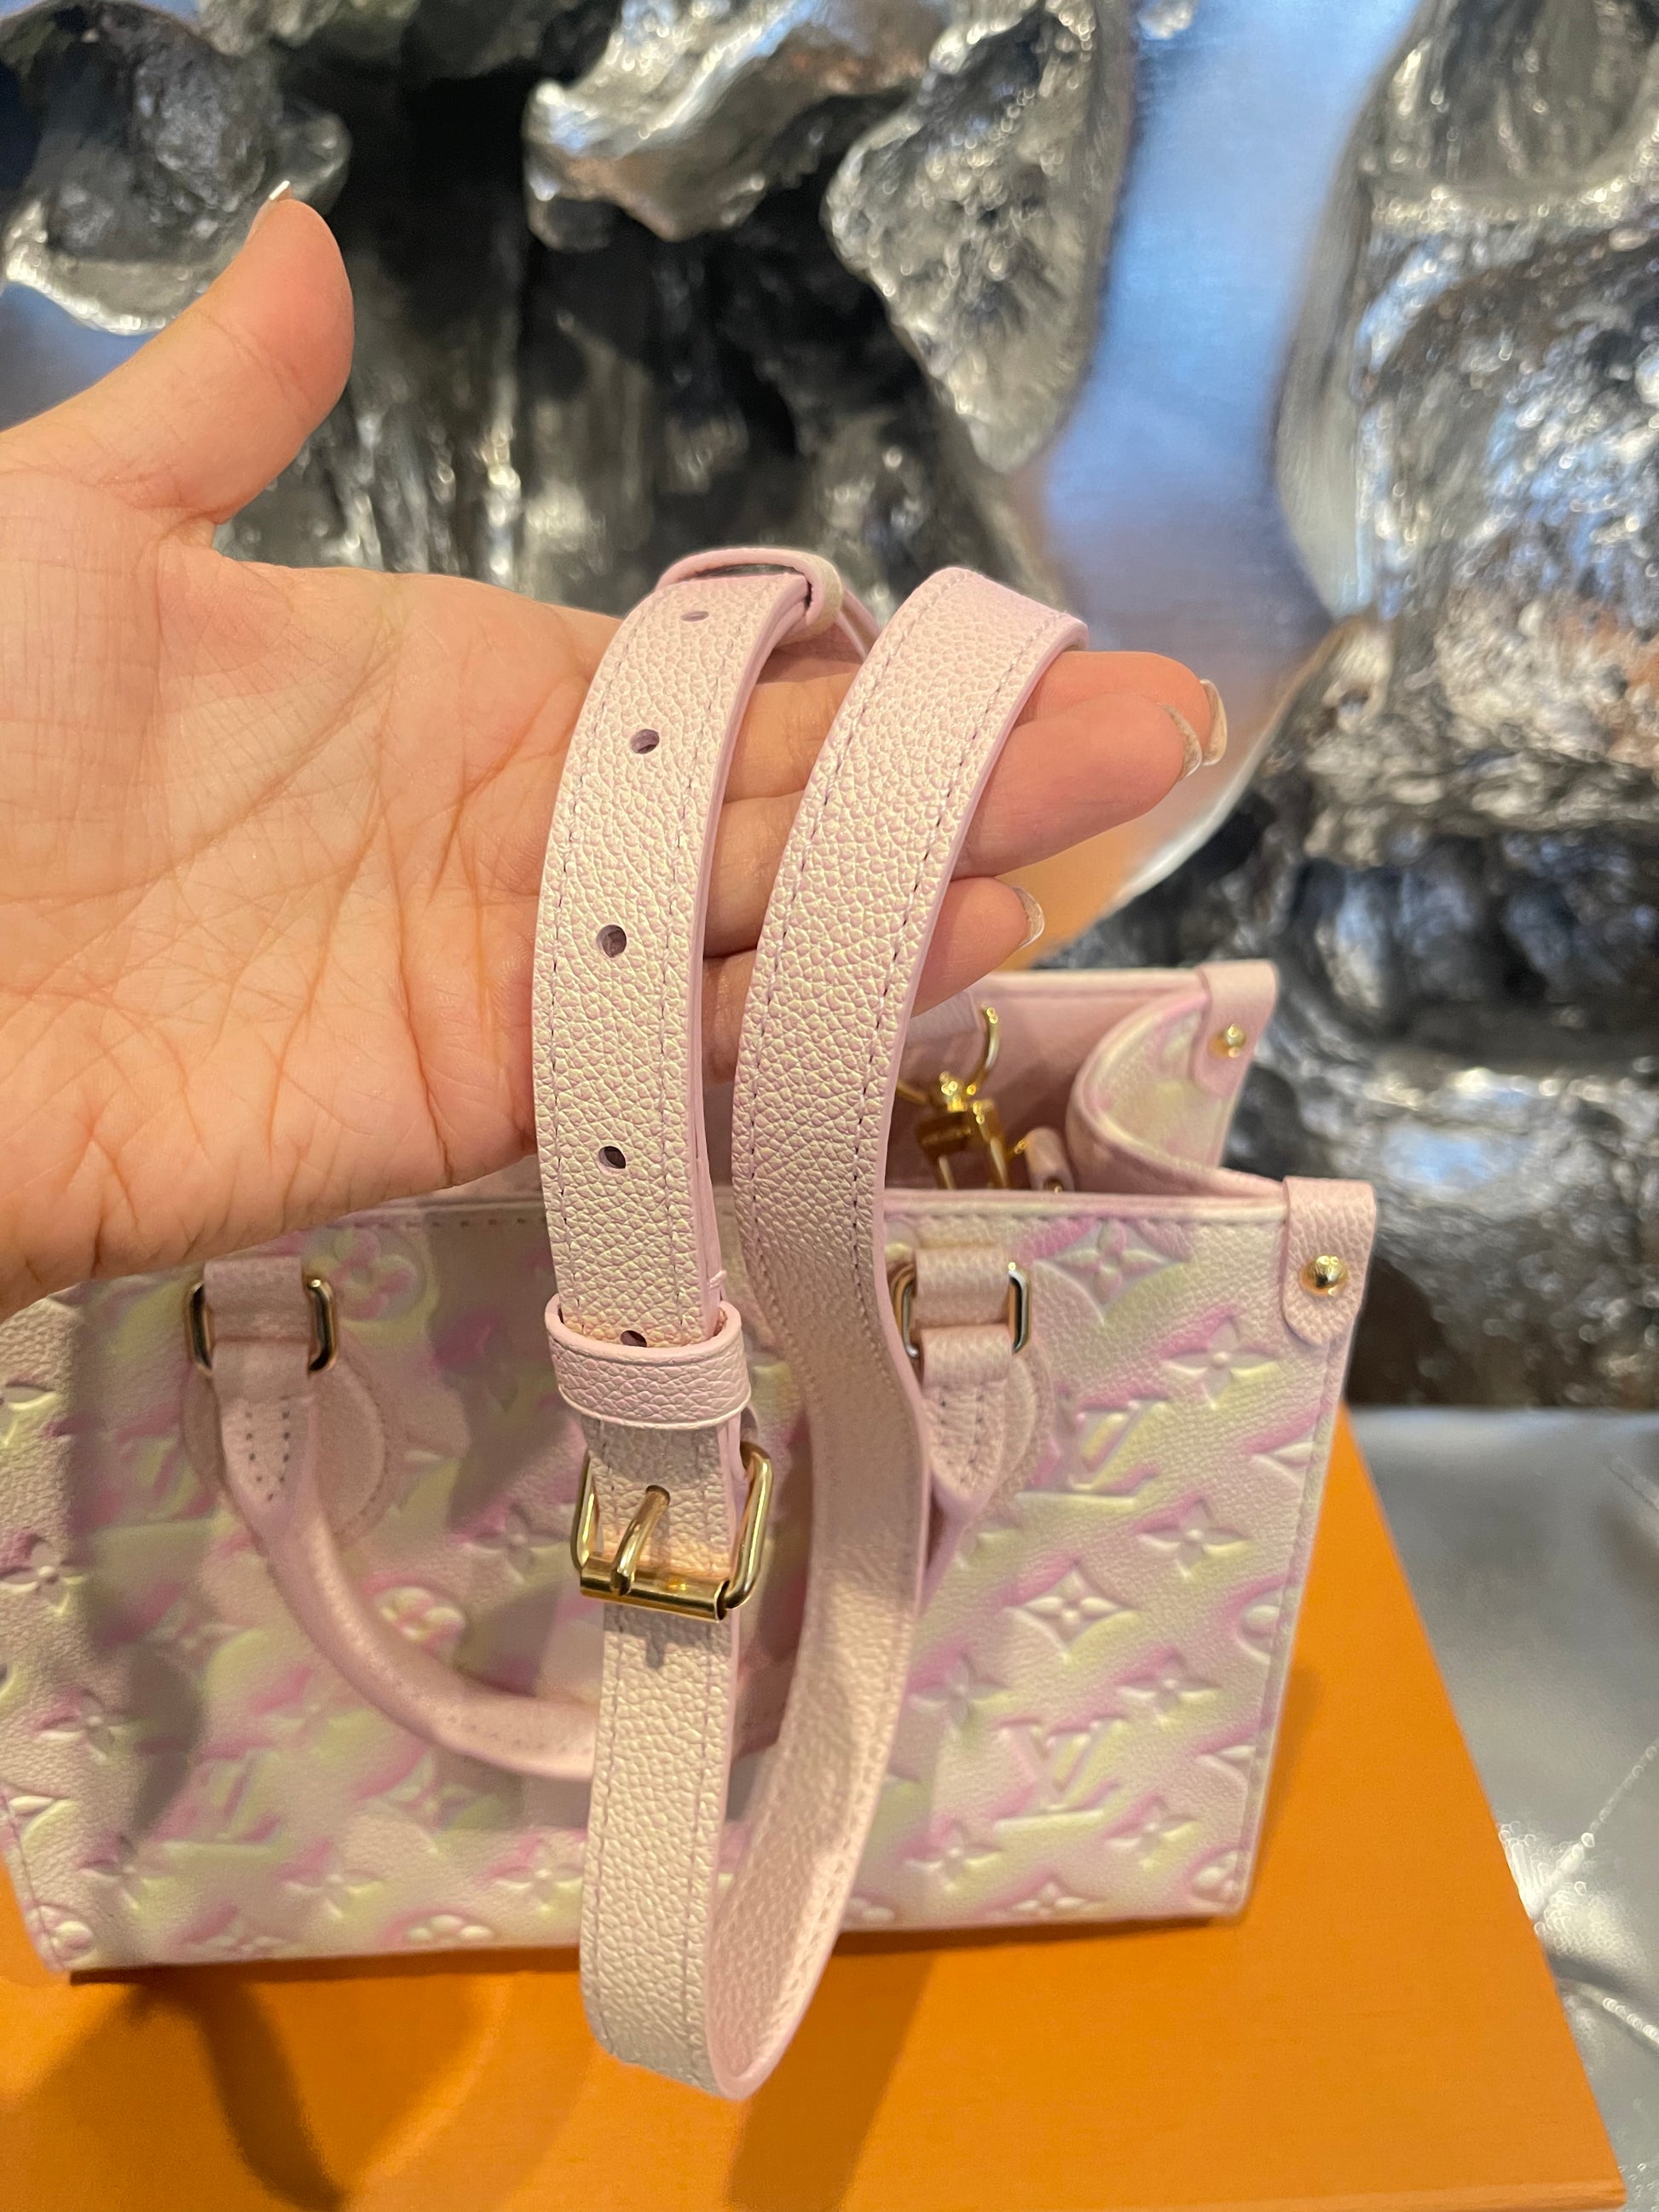 Louis Vuitton OnTheGo PM Stardust Lilas Bag